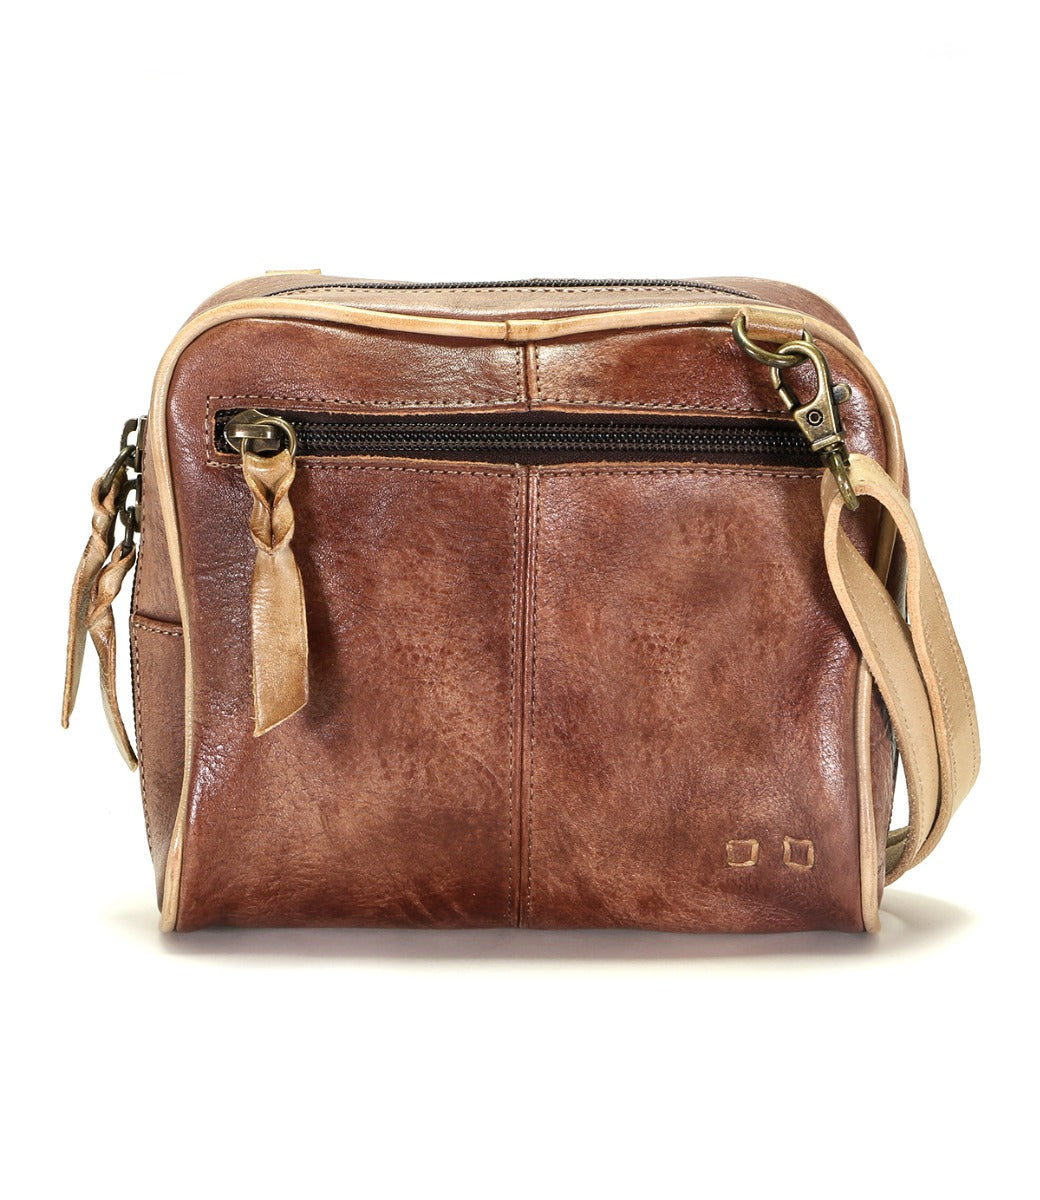 An image of a Bed Stu Capture brown leather cross body bag.